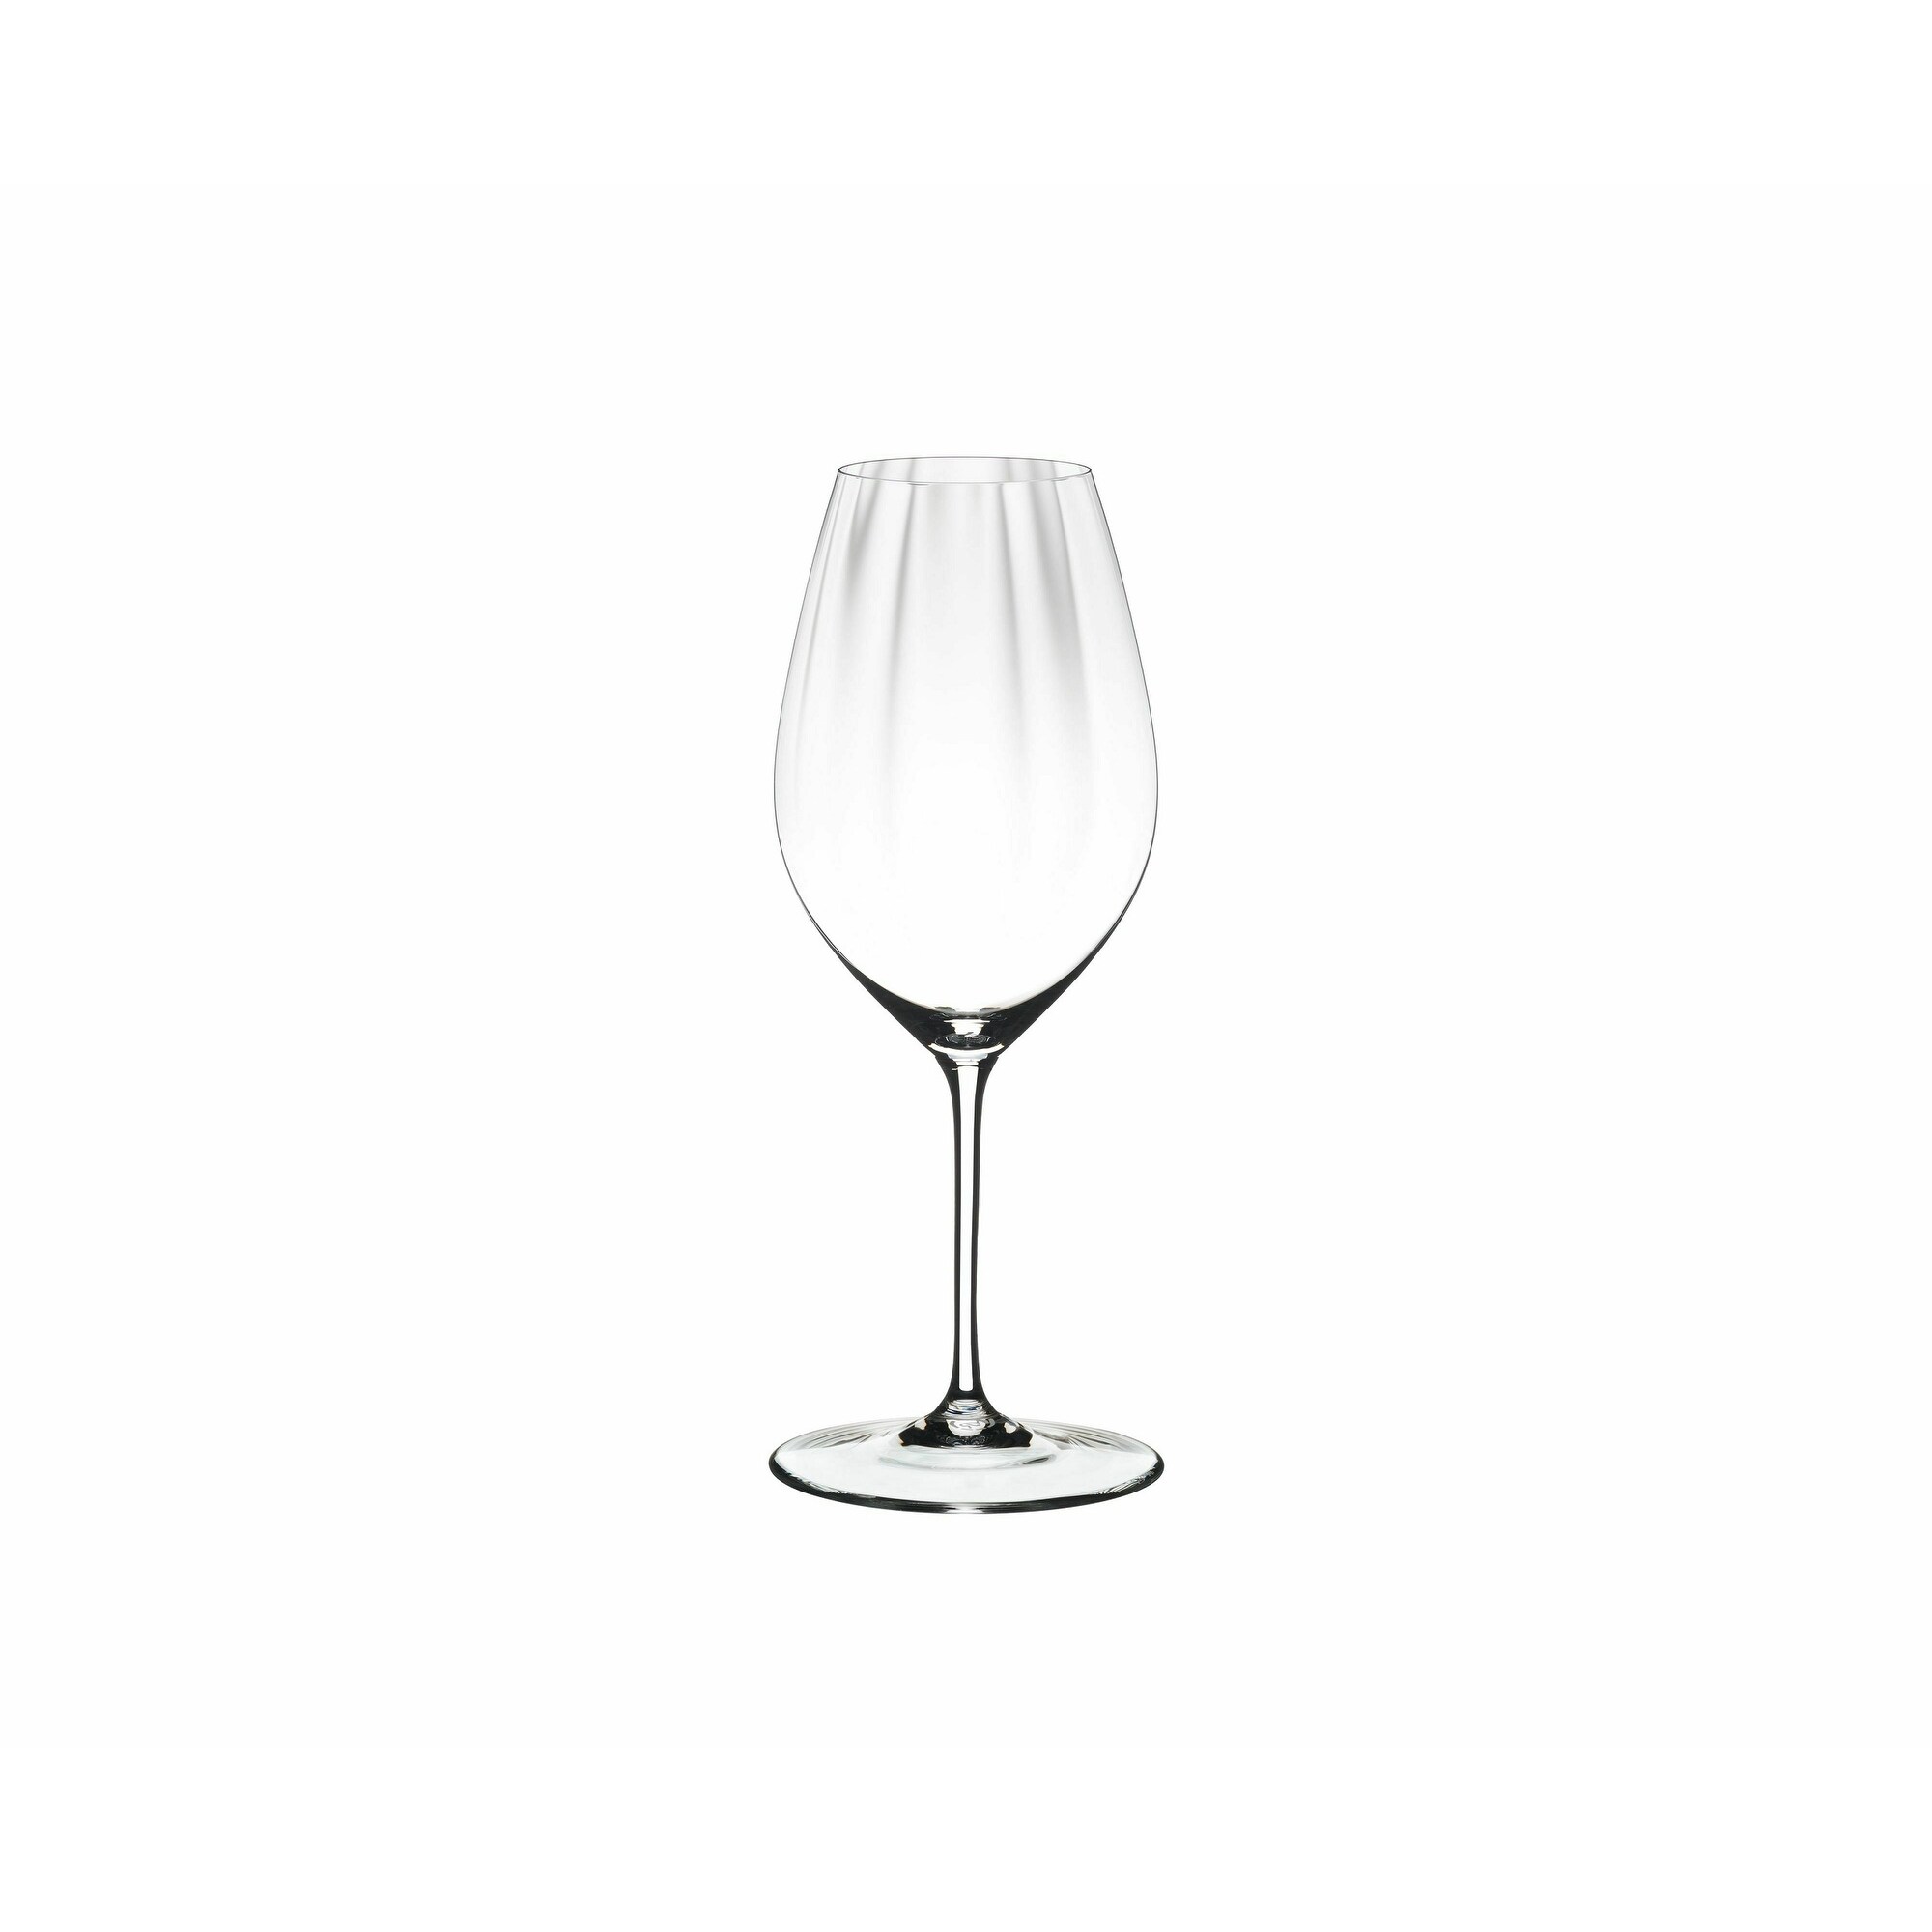 https://ak1.ostkcdn.com/images/products/is/images/direct/5a92f525ea52d58677e794f8f41e479bed514987/Riedel-Performance-Red-White-Crystal-Wine-Glasses-%28Set-of-4%29.jpg